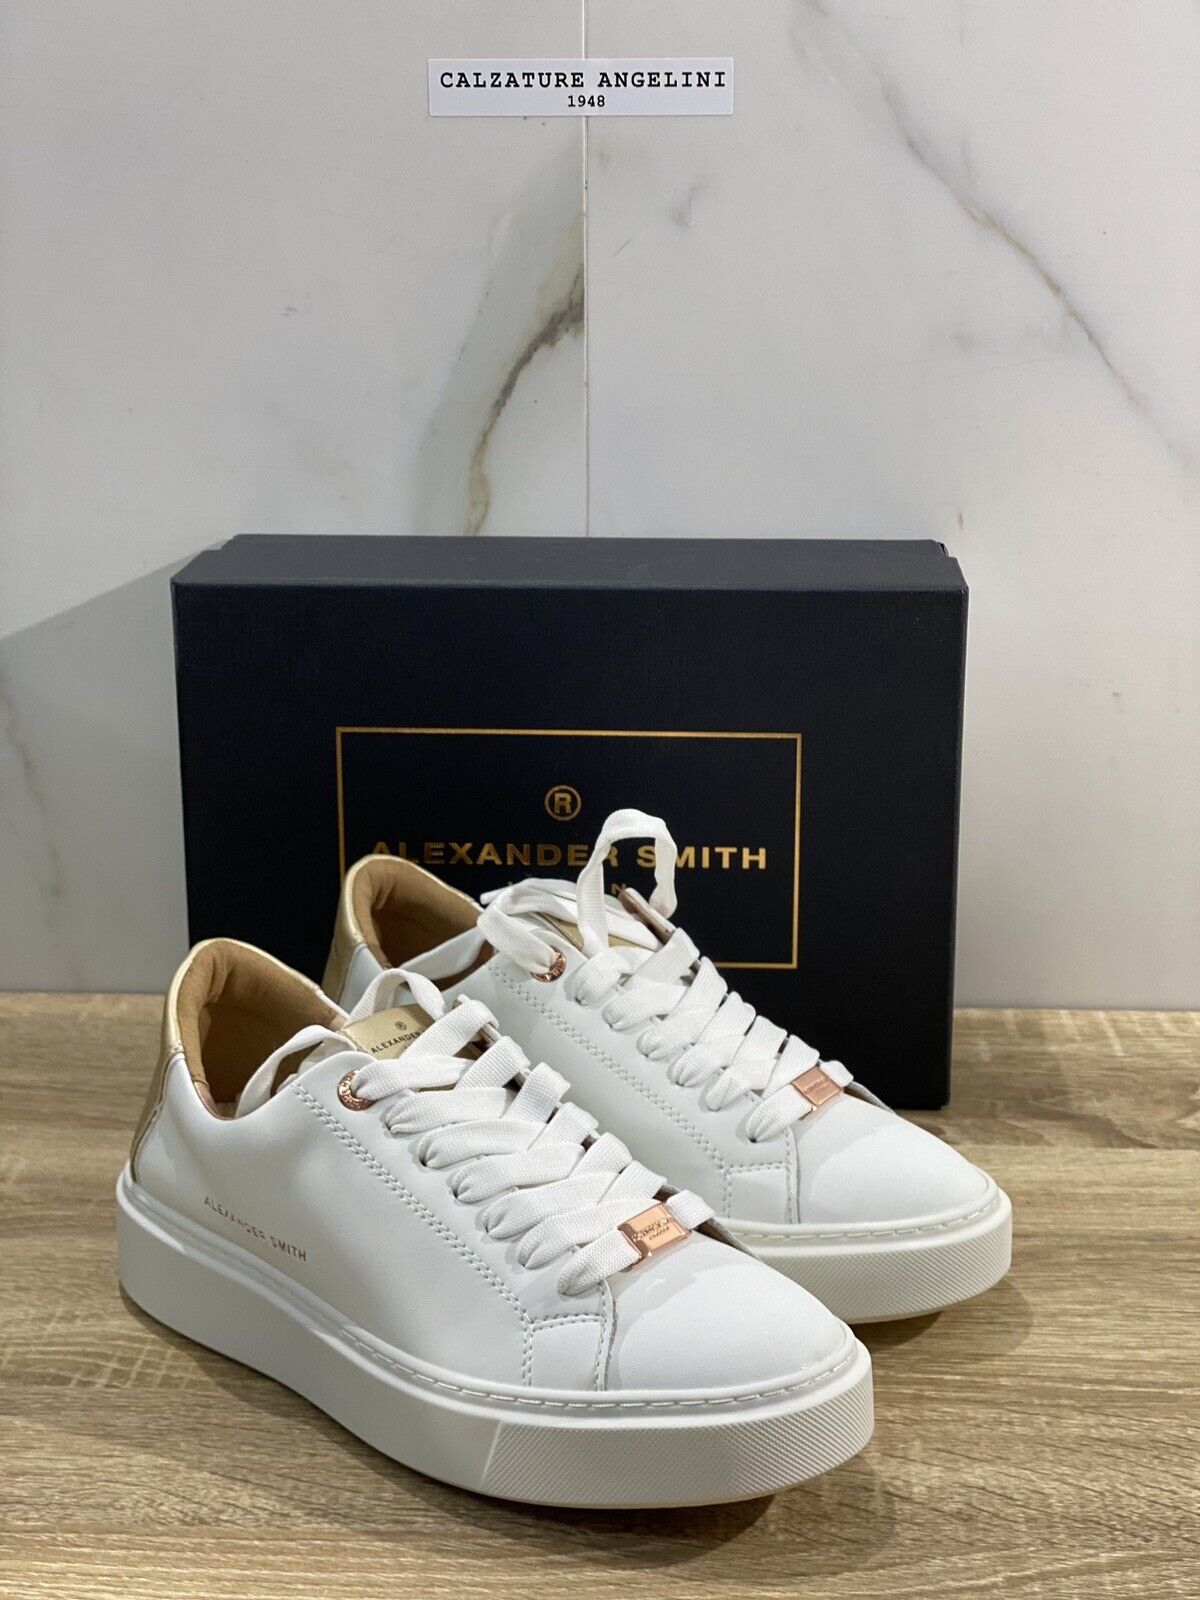 Alexander smith london sneaker donna in pelle White Gold Extra Light casual   40